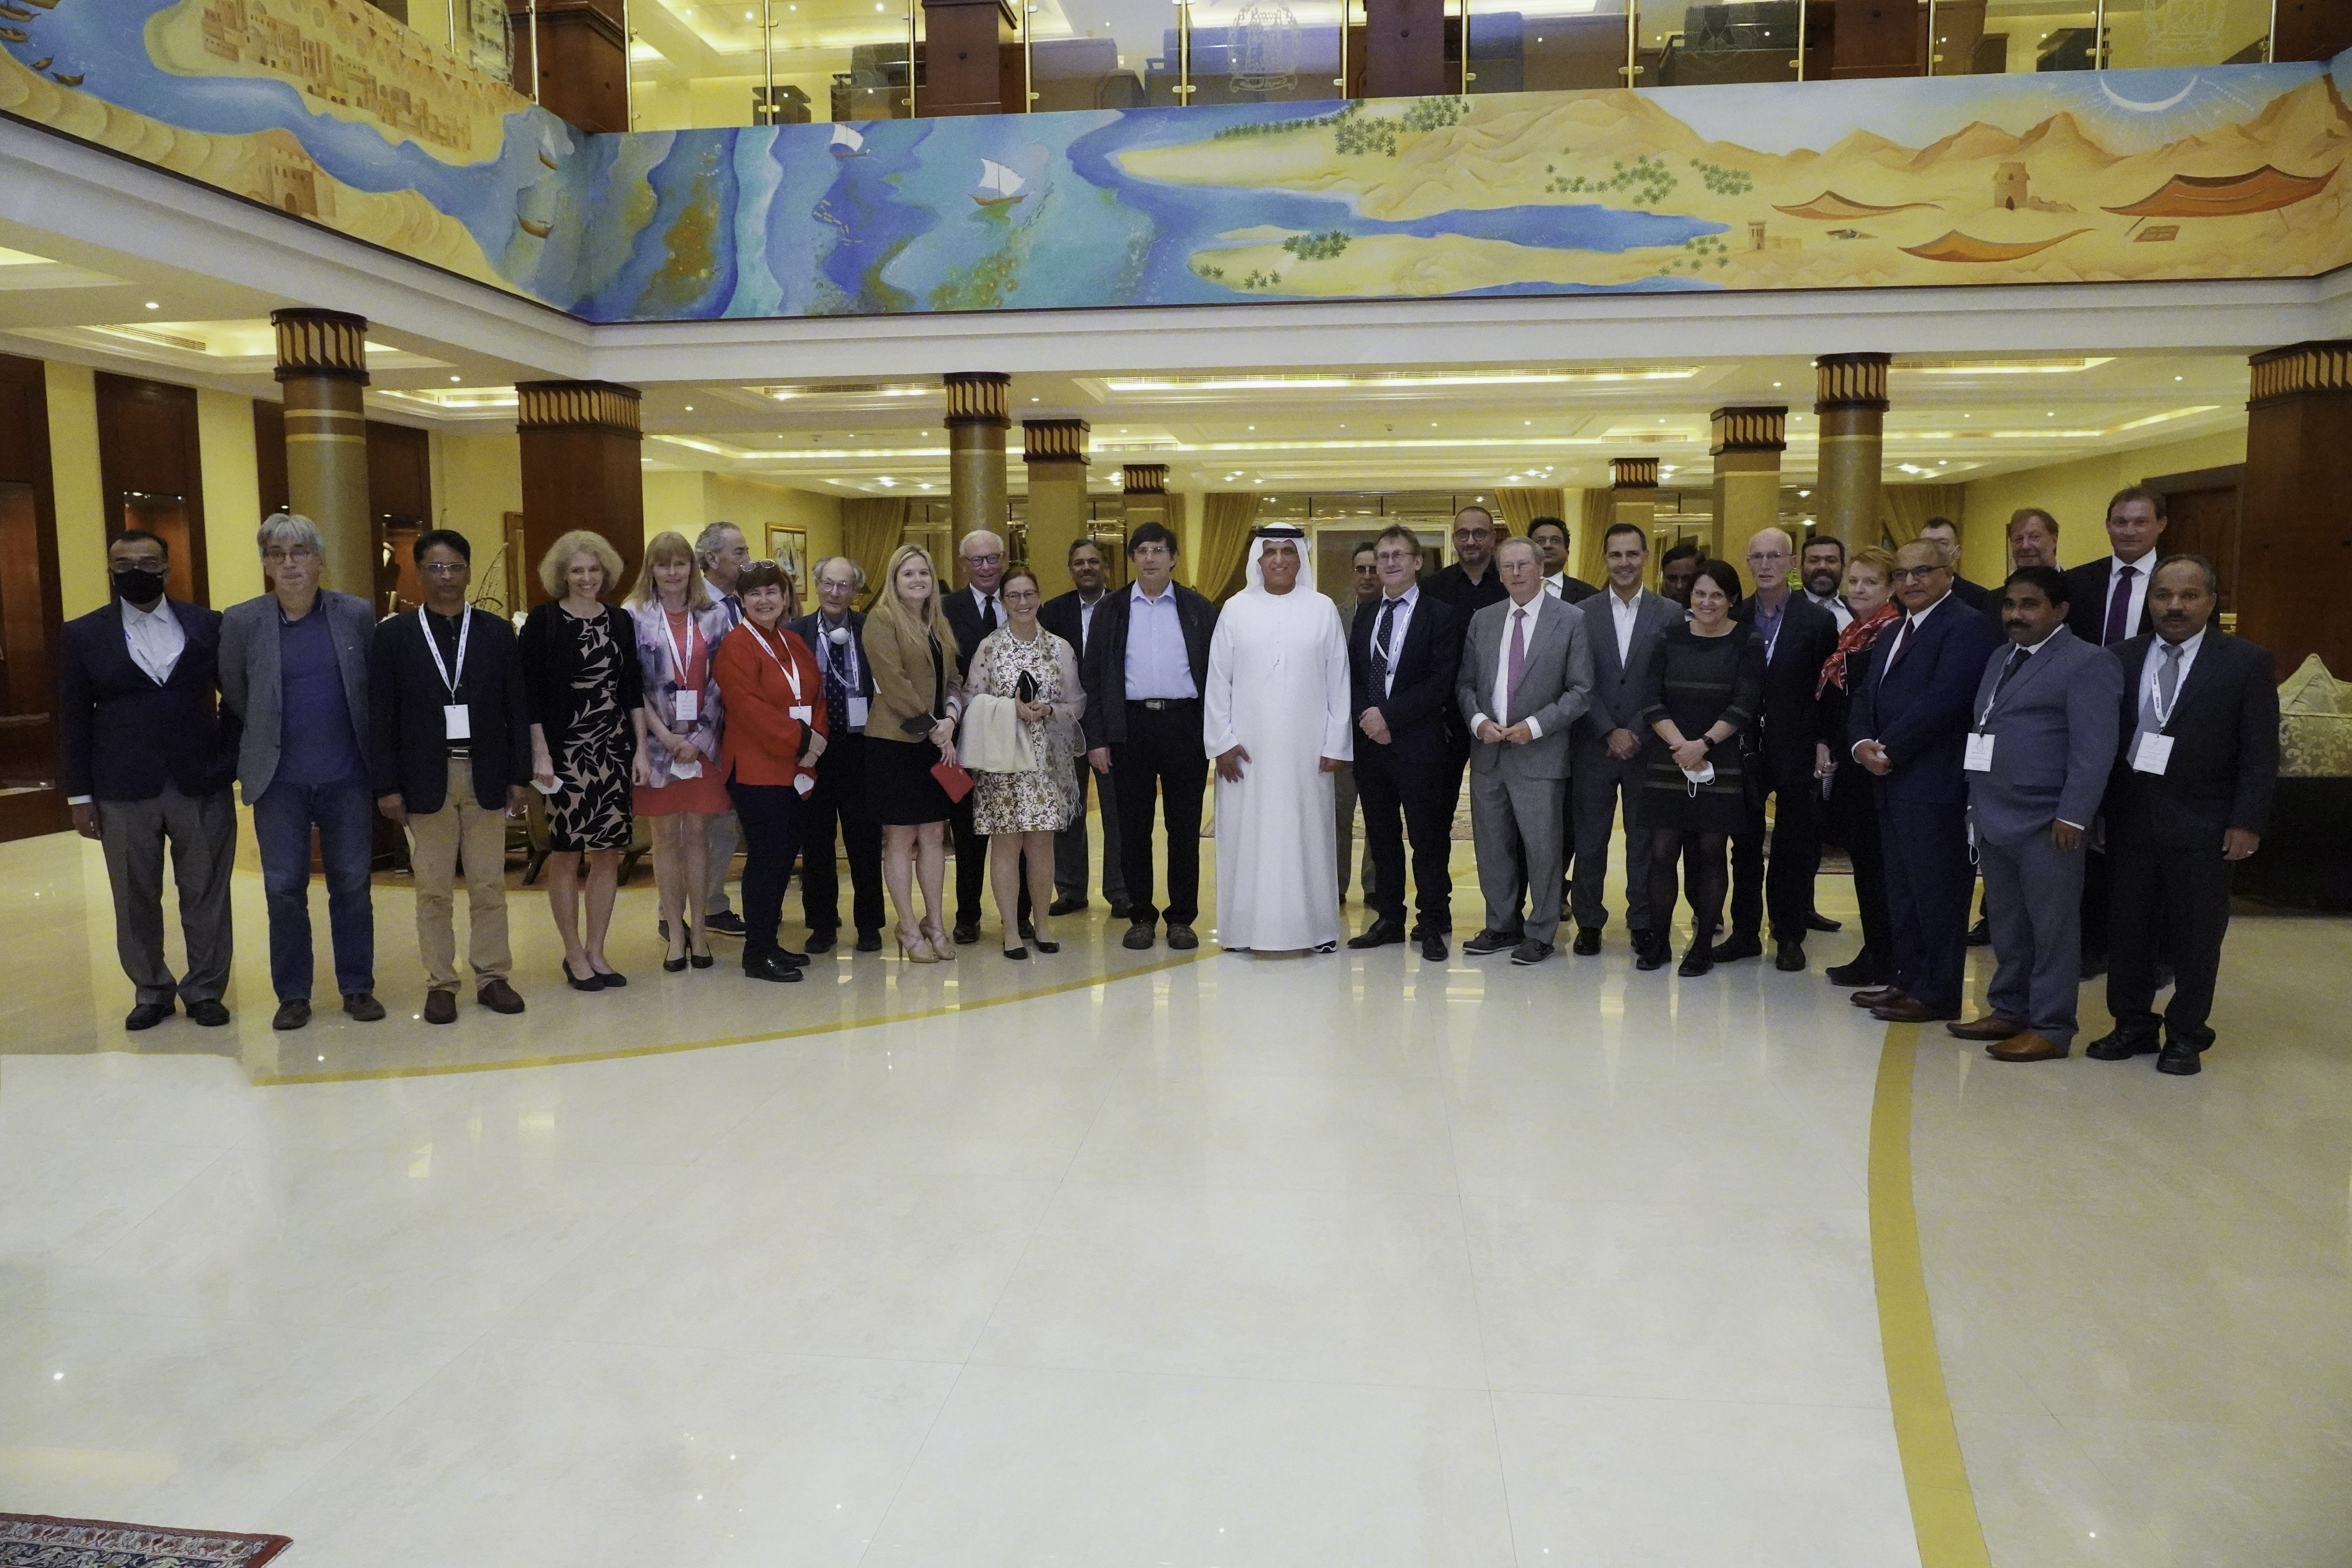 Image: Attendees with His Highness Sheikh Saud bin Saqr Al Qasimi (middle)